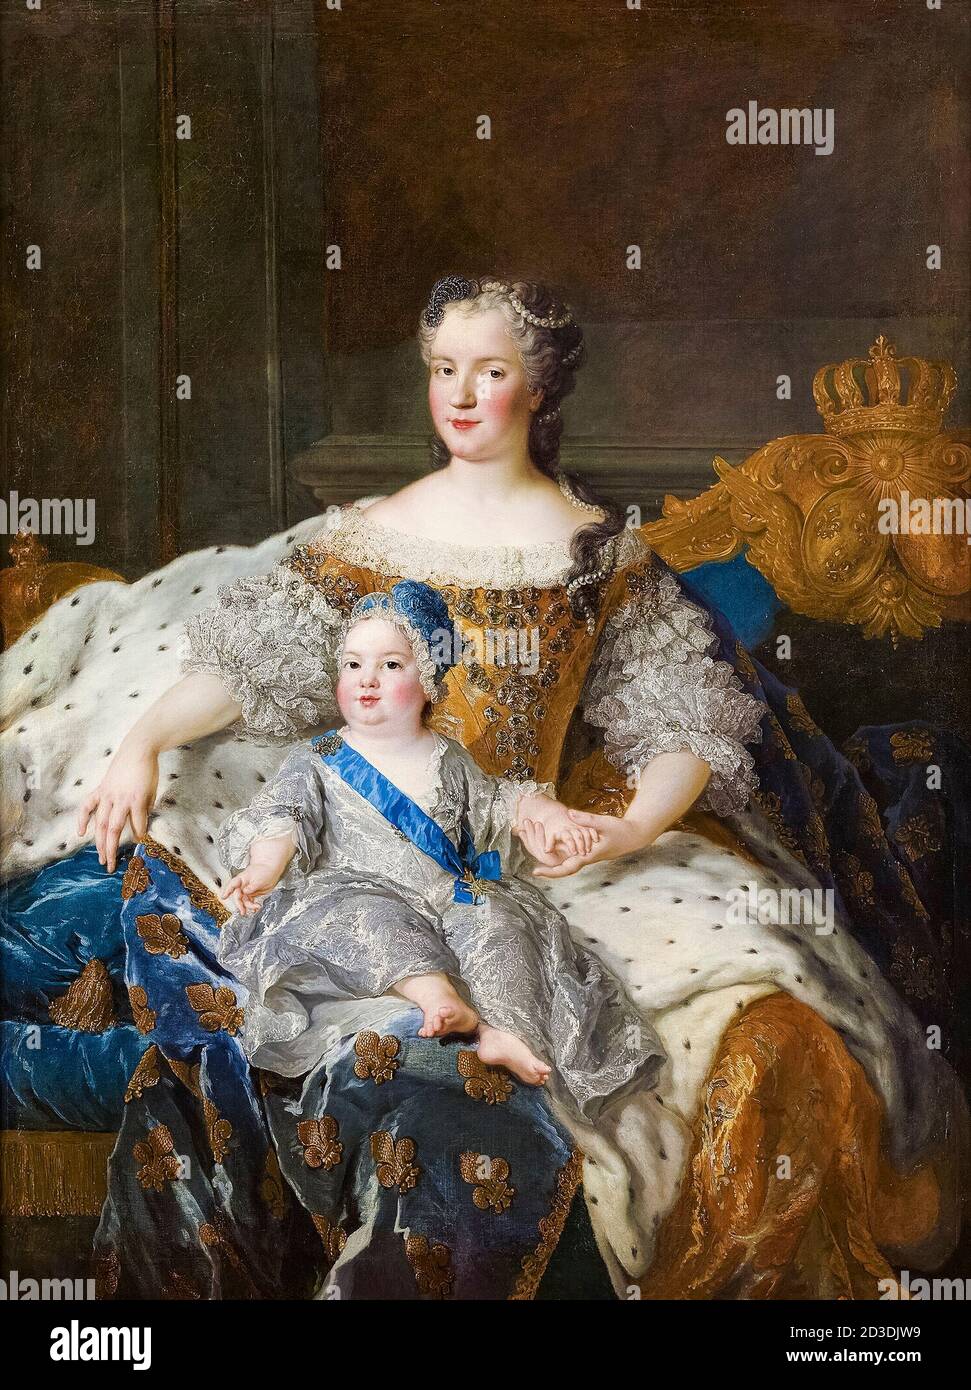 Marie Leszczyńska (1703-1768), Queen Consort of France with her son Louis, Dauphin of France (1729-1765), portrait painting by Alexis Simon Belle, circa 1730 Stock Photo